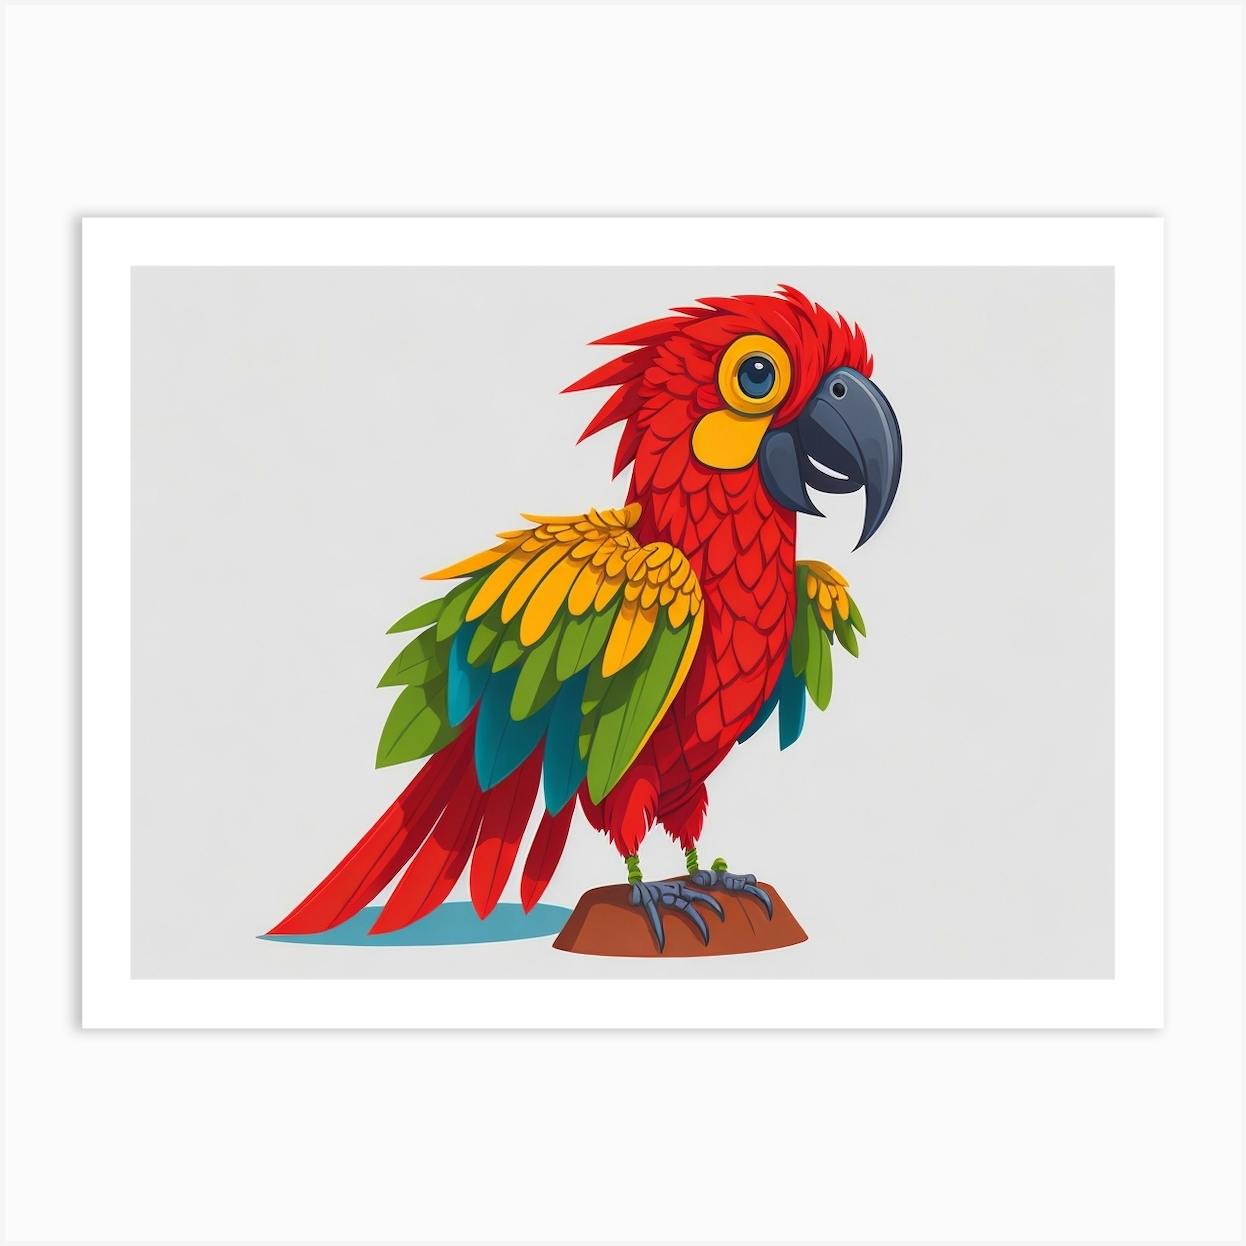 Colourful Parrots Are Always Beautiful The - GranNino